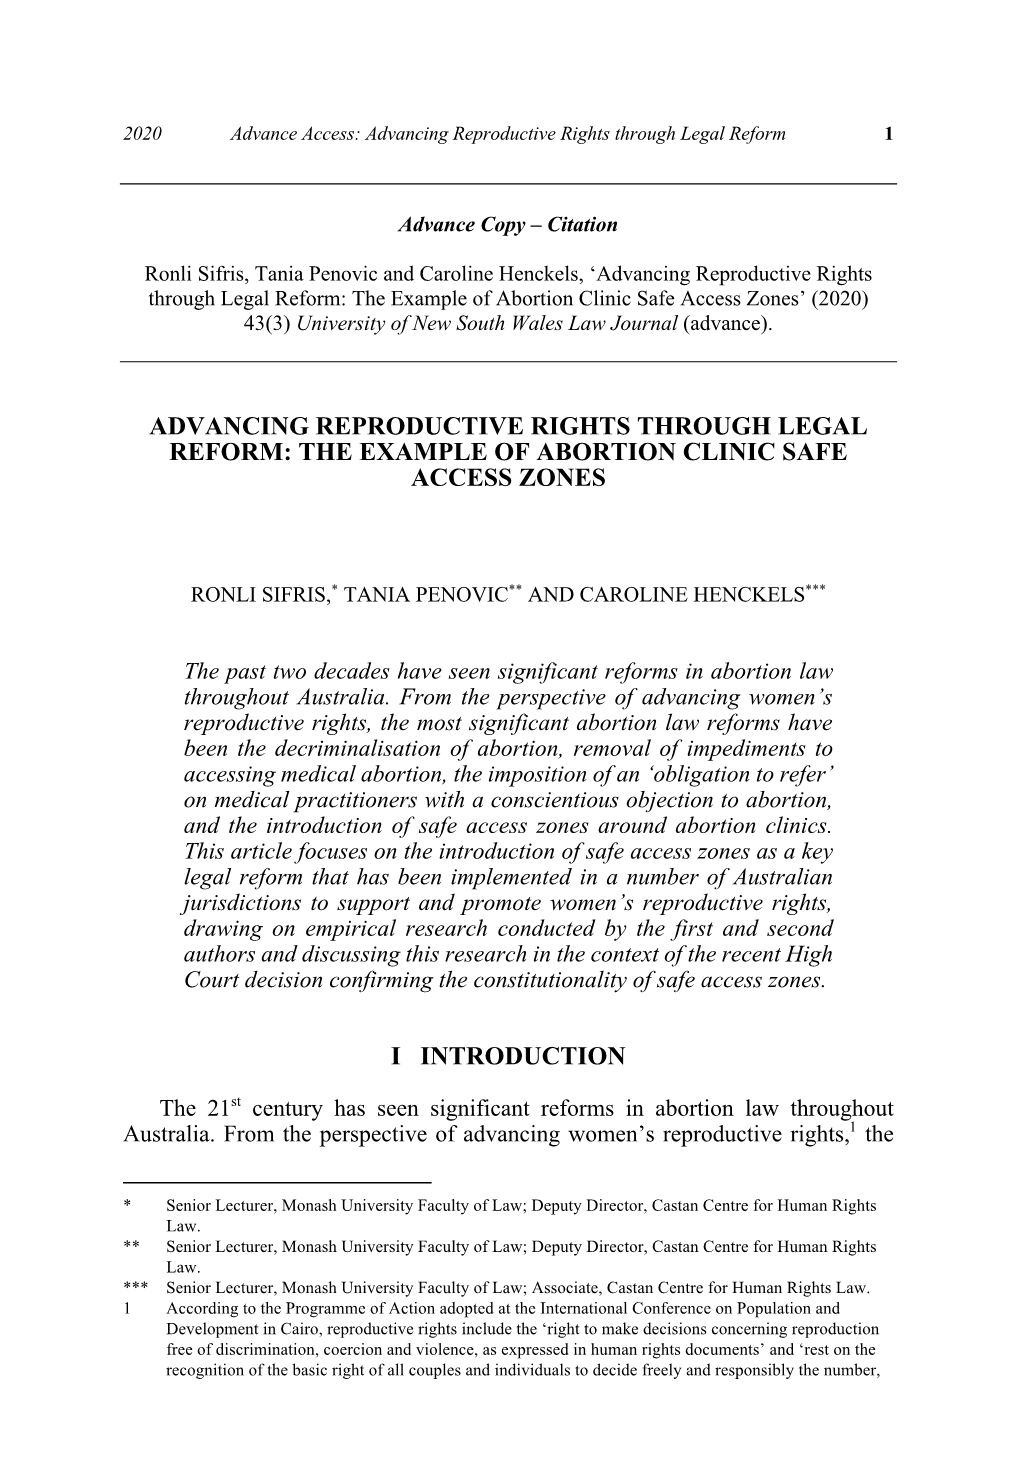 Advancing Reproductive Rights Through Legal Reform 1